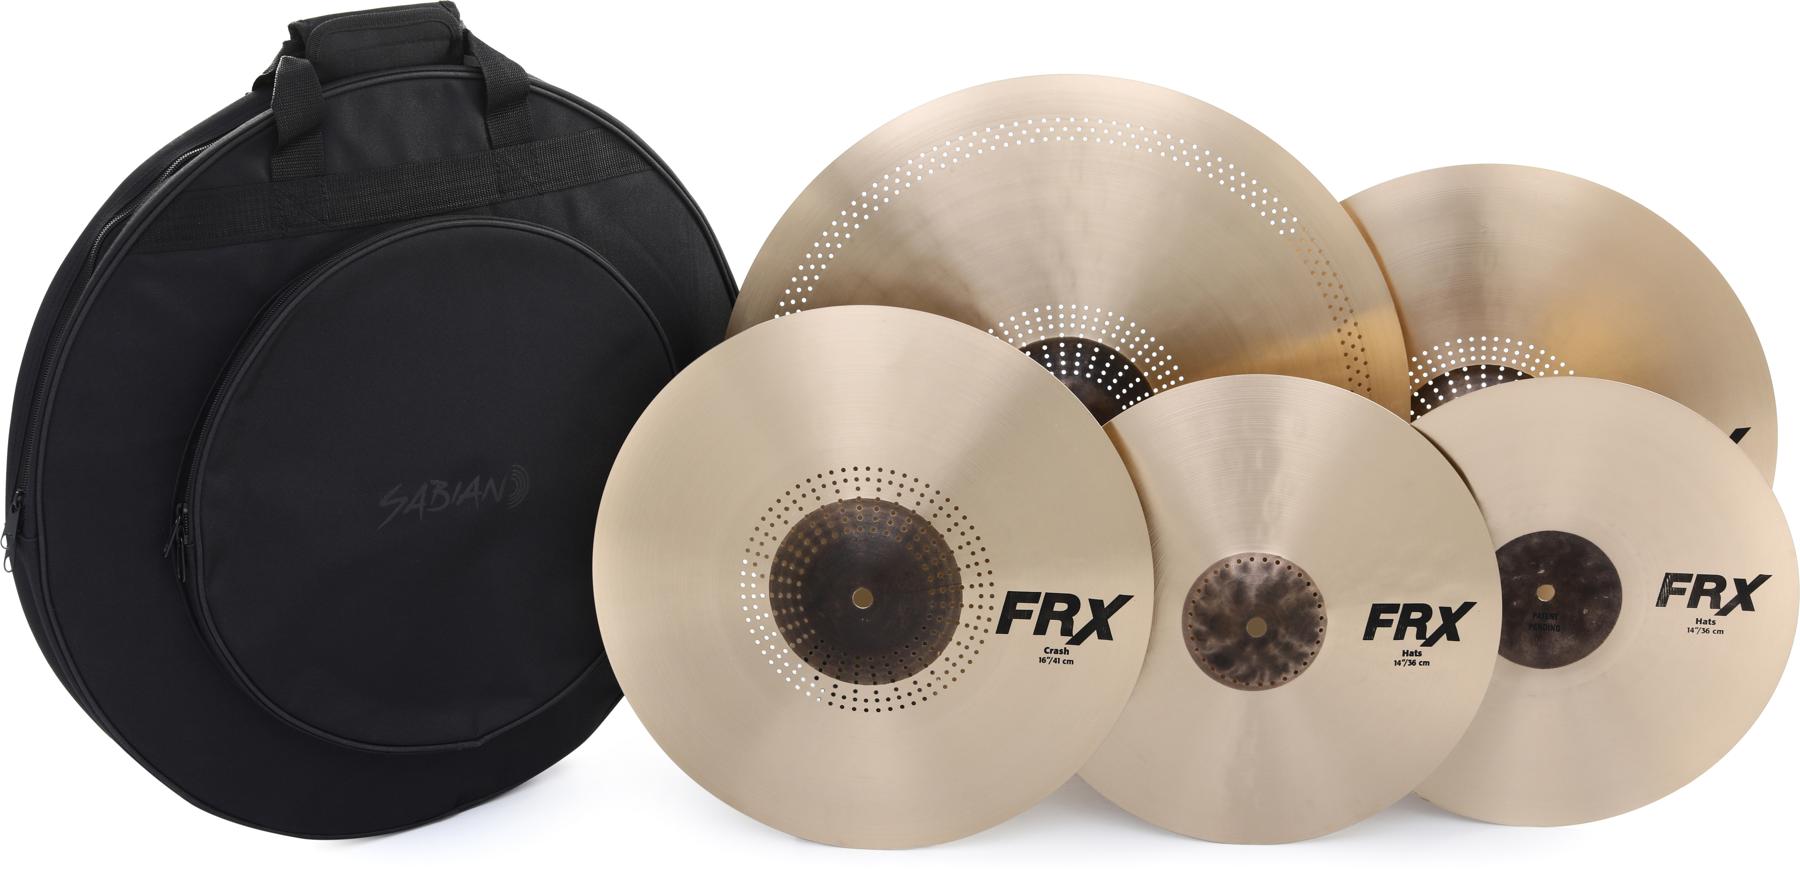 Sabian FRX Performance Cymbal Set - 14/16/18/21 inch - with Free 24 inch Cymbal Bag